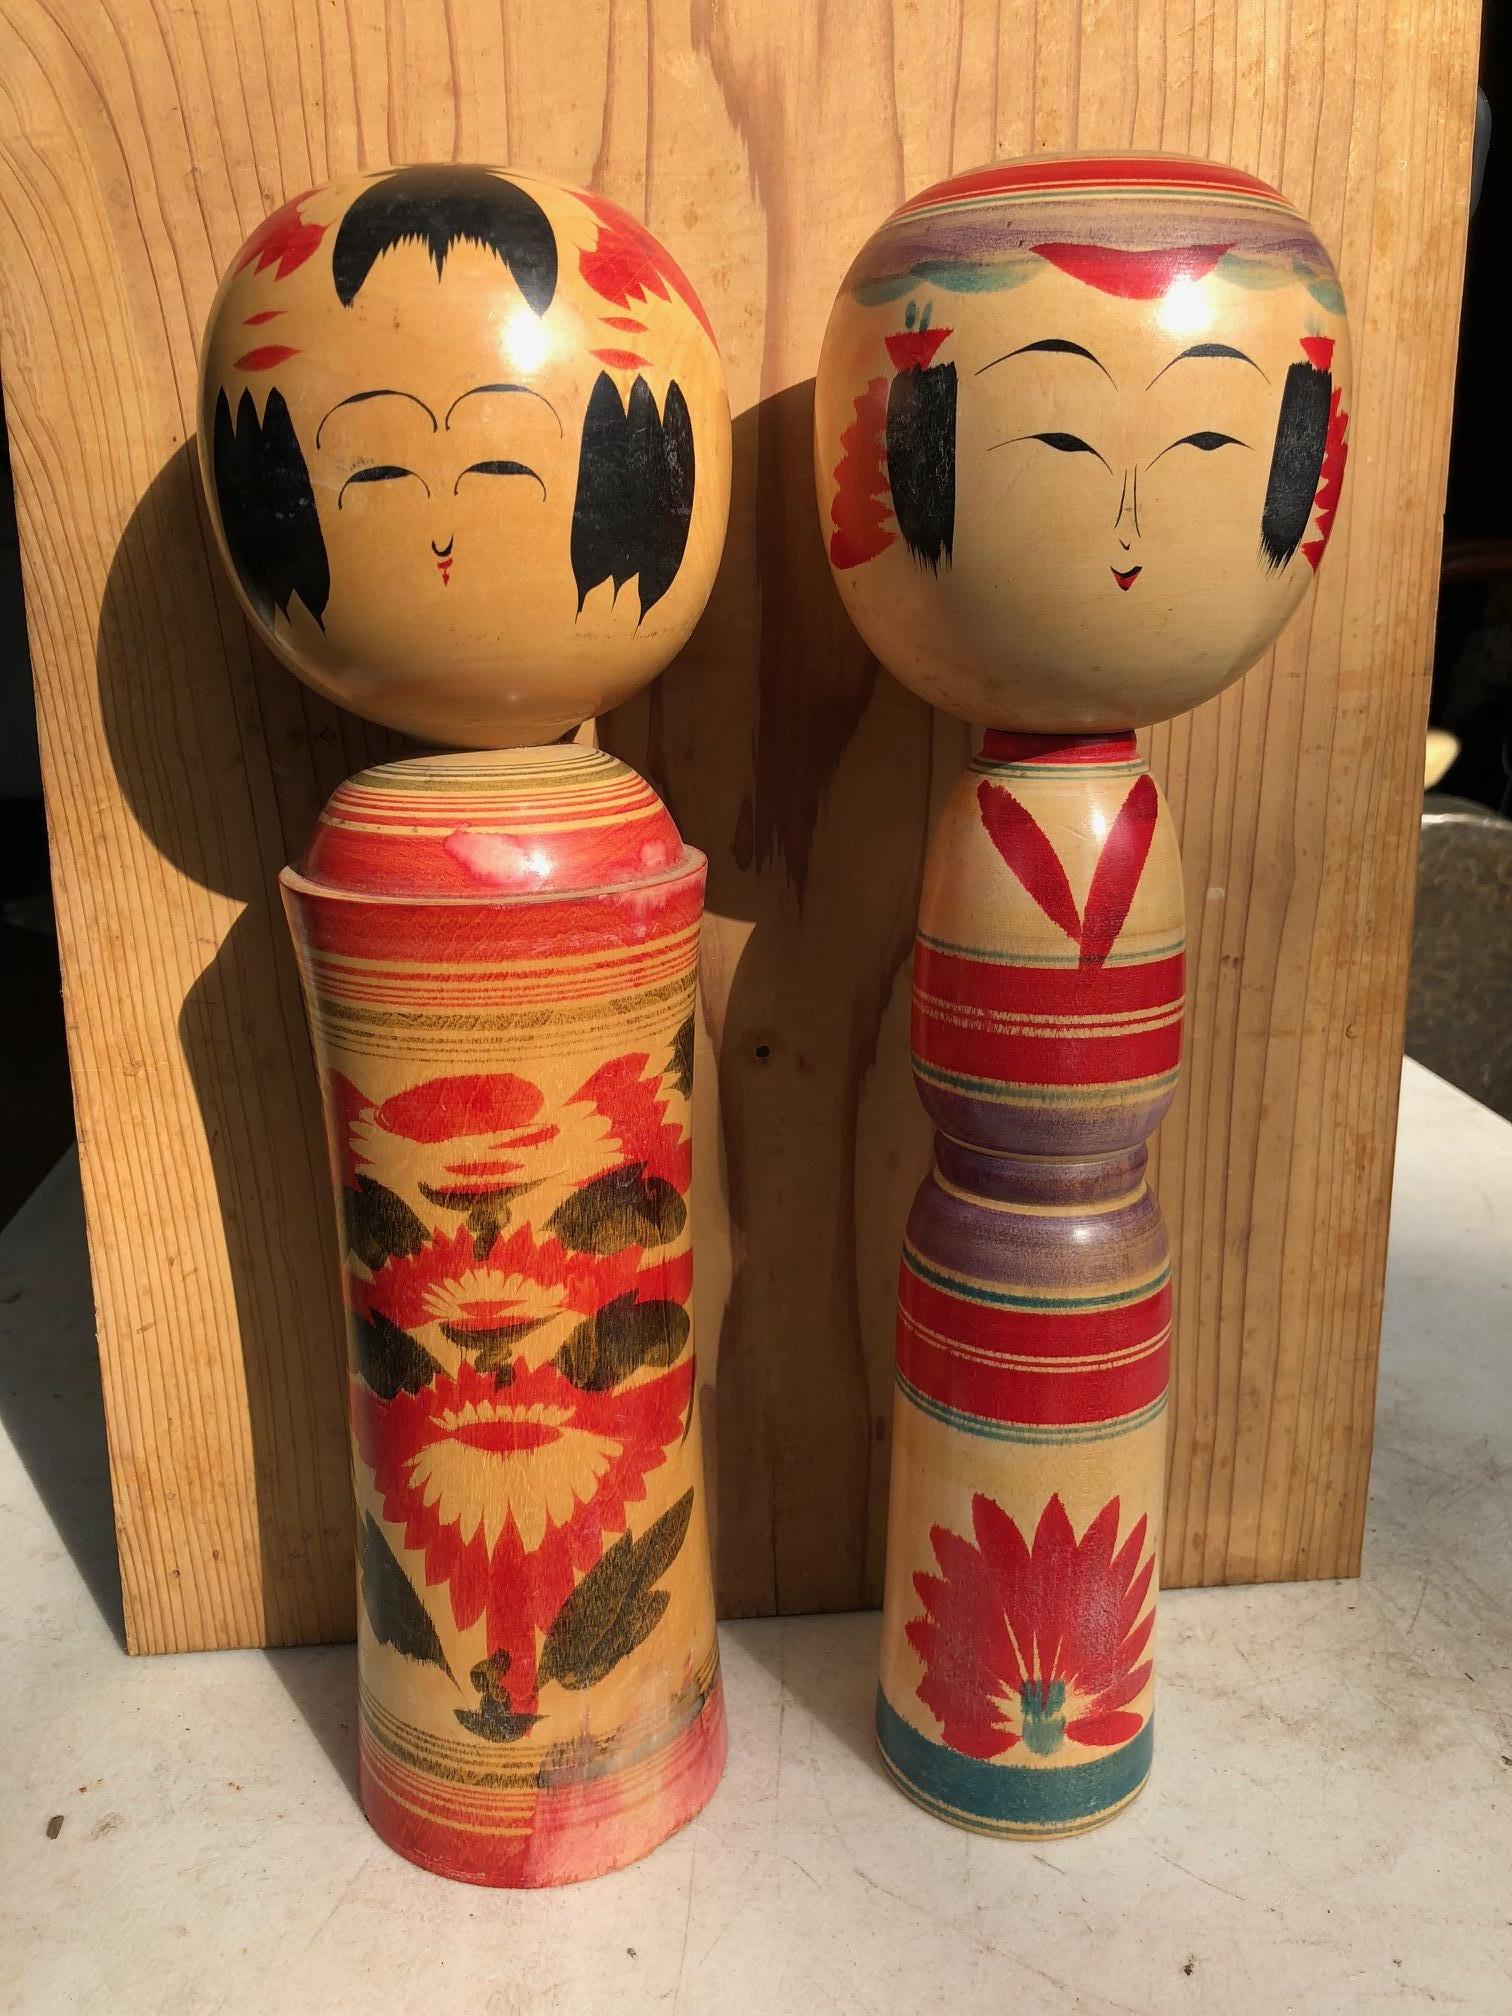 Tall and signed, fine quality, rich vibrant colors

A beautifully preserved pair of Japanese Folk Art surviving tall pair (2) fine hand carved and hand painted Kokeshi dolls one of Japan's most popular antique doll collectibles and unique